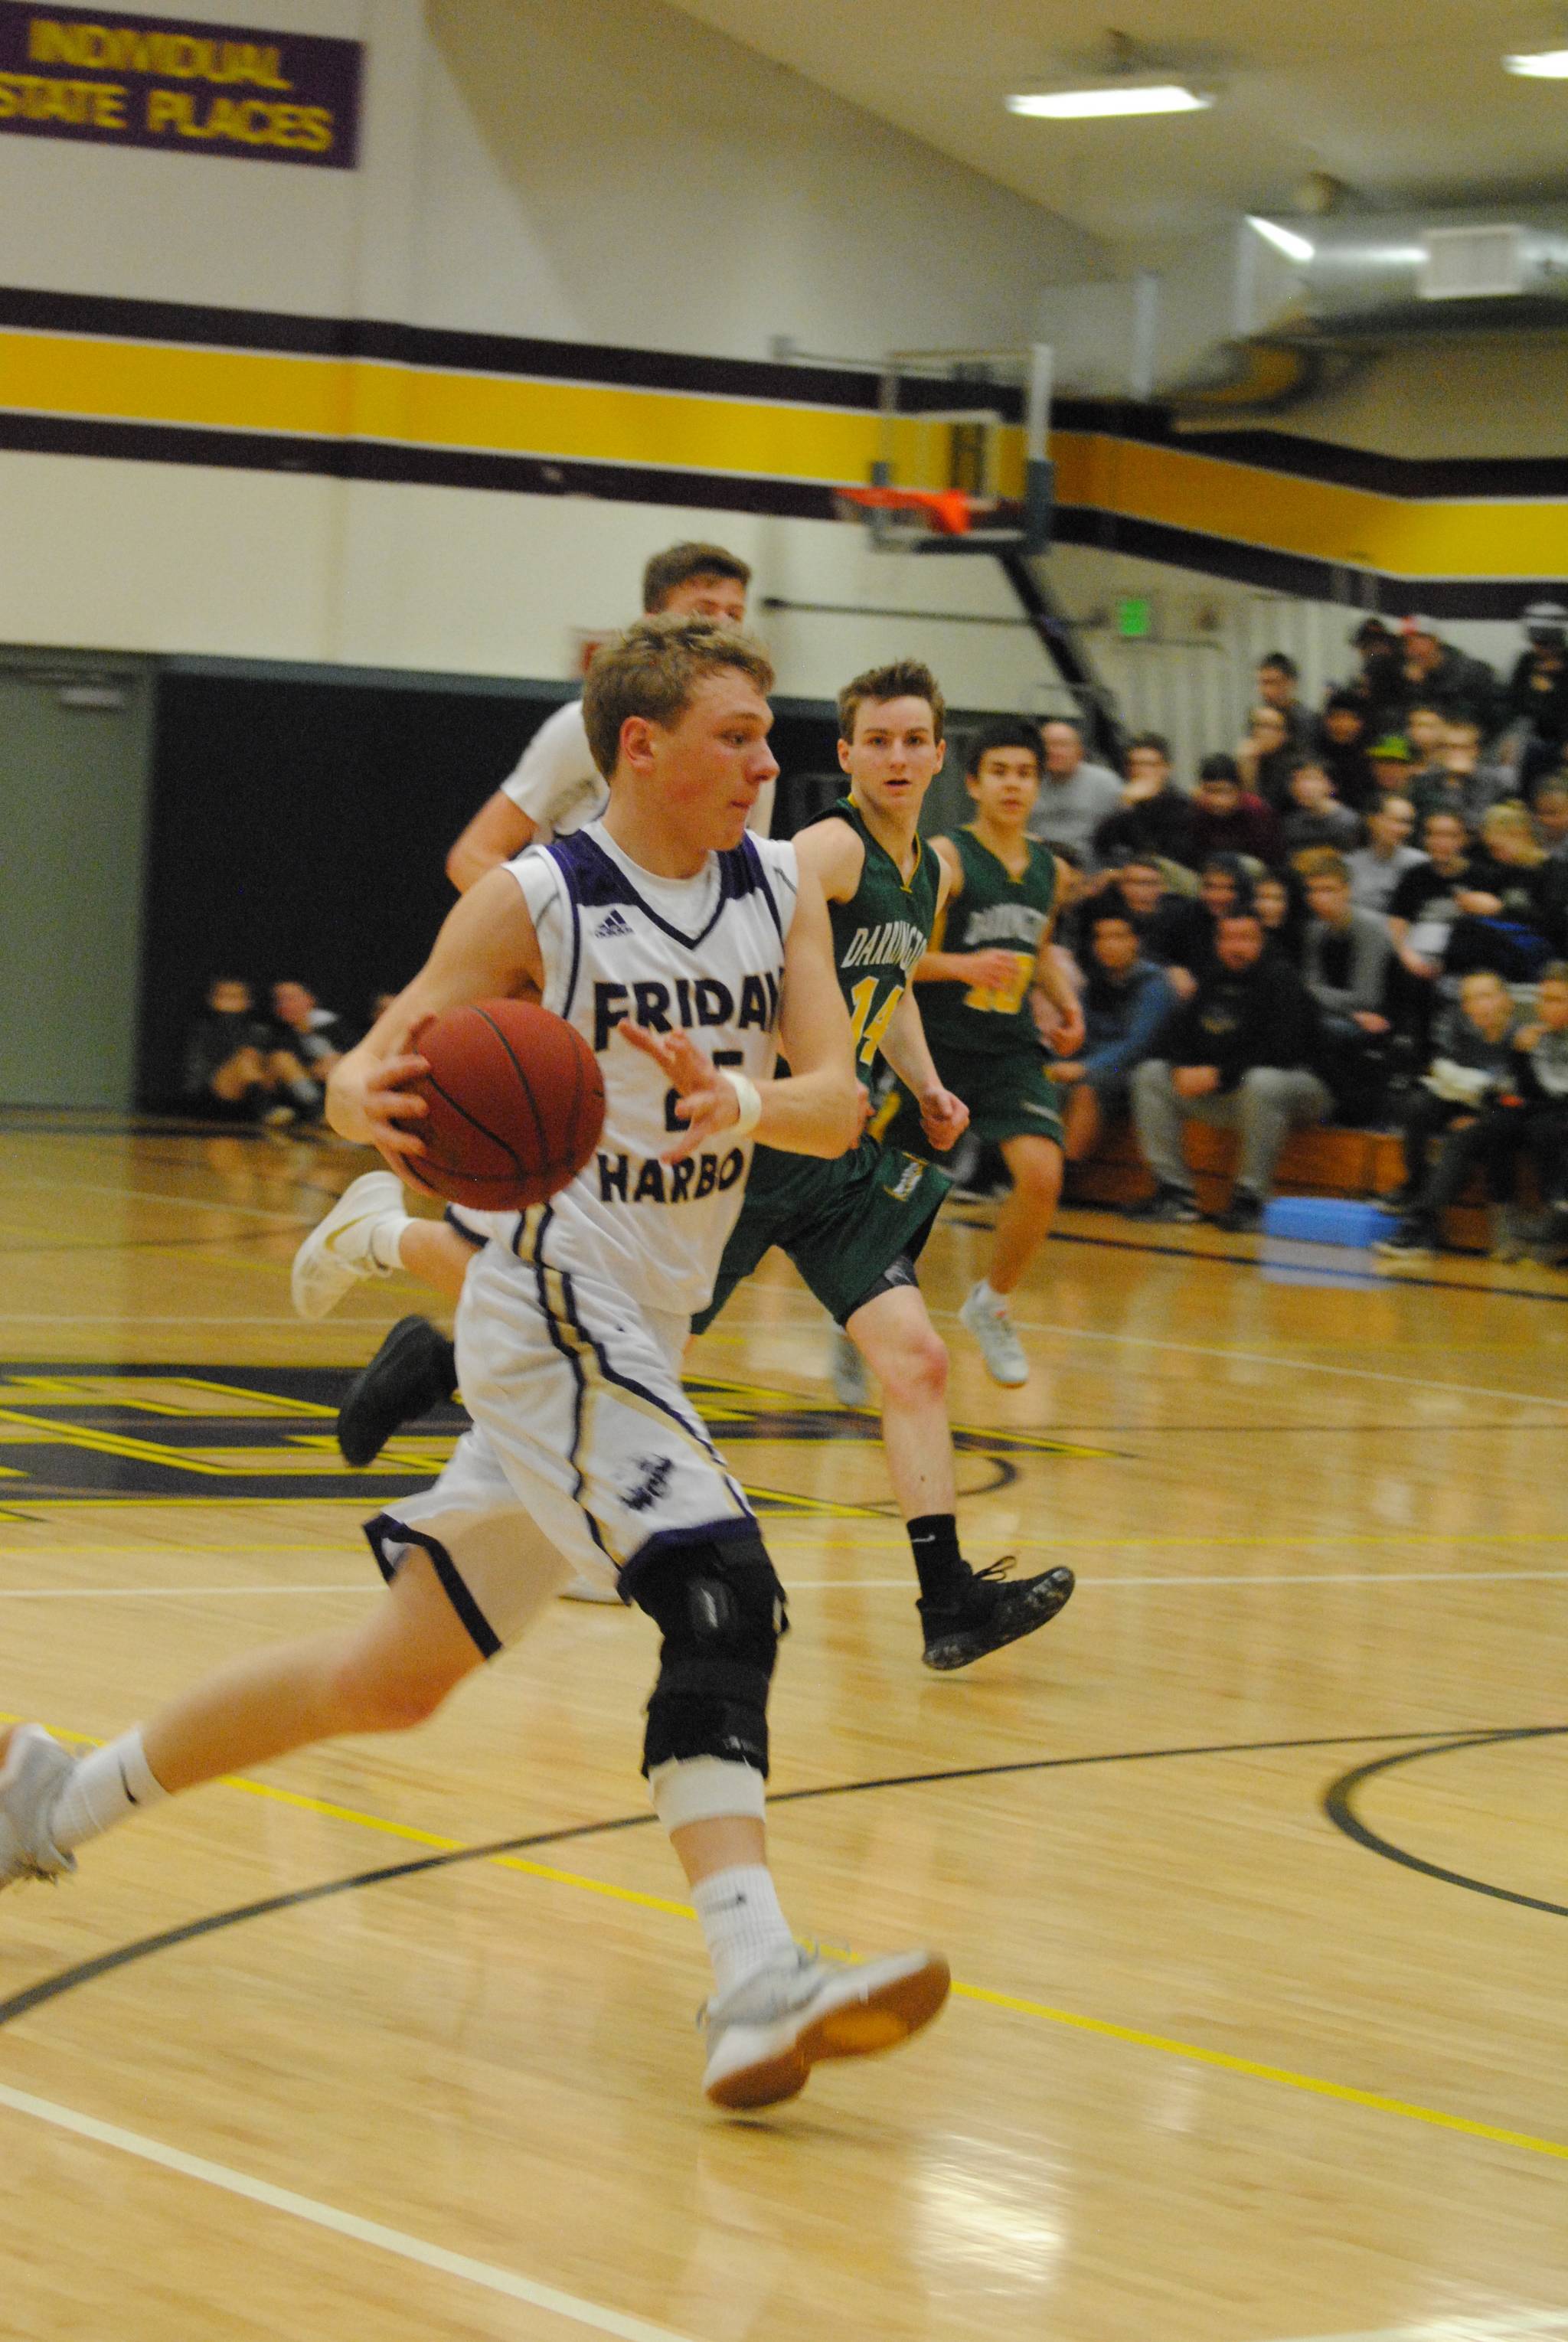 Boys’ Wolverines win against Loggers